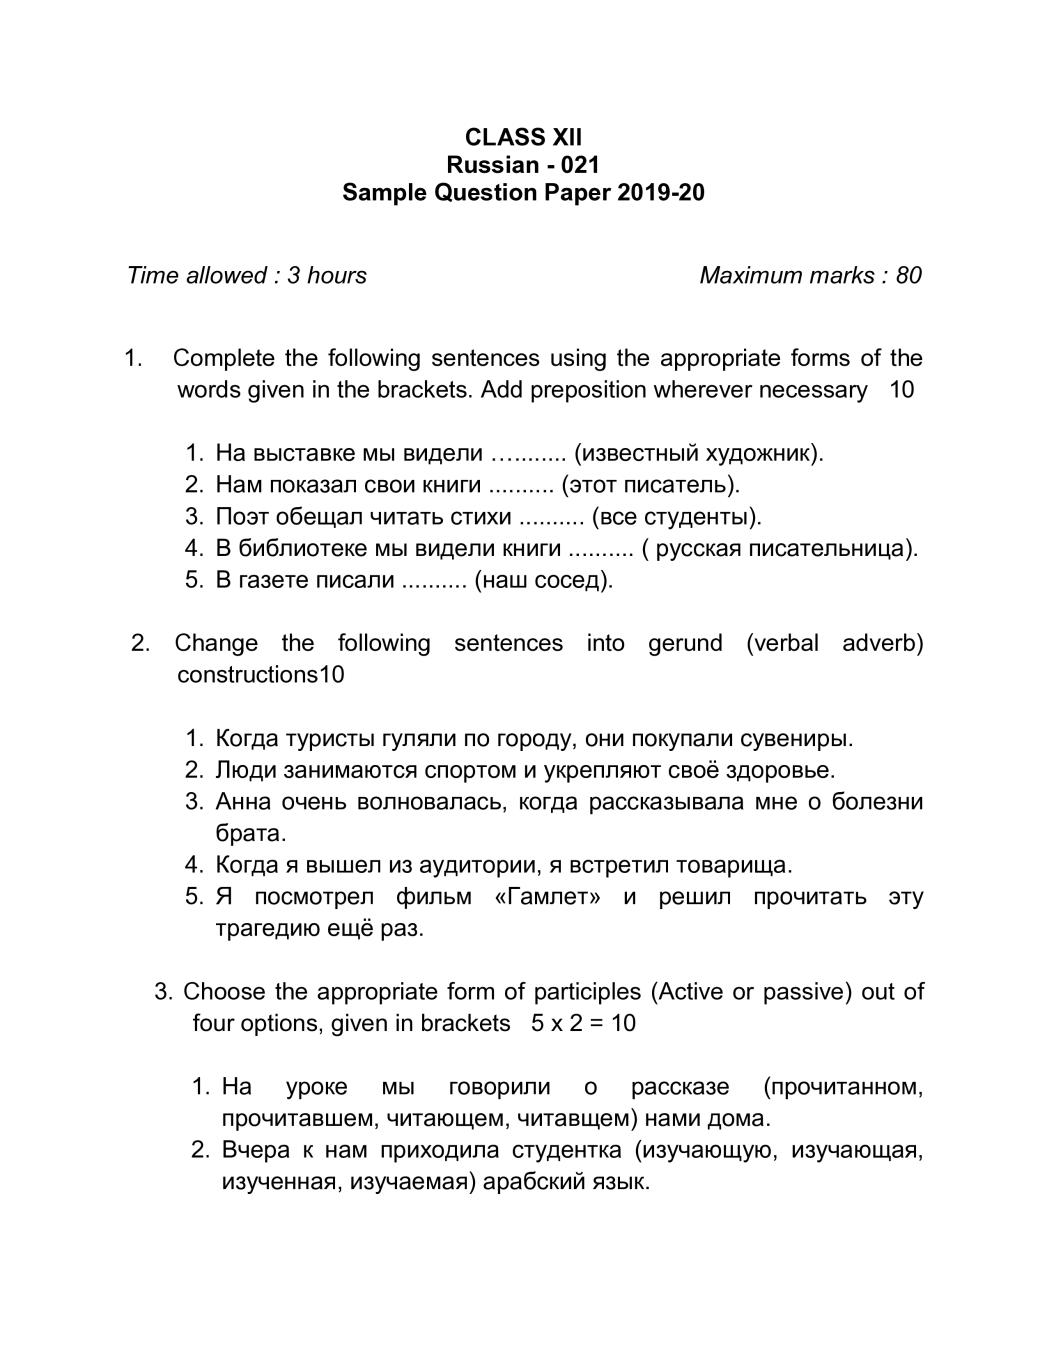 CBSE Class 12 Sample Paper 2020 for Russian - Page 1